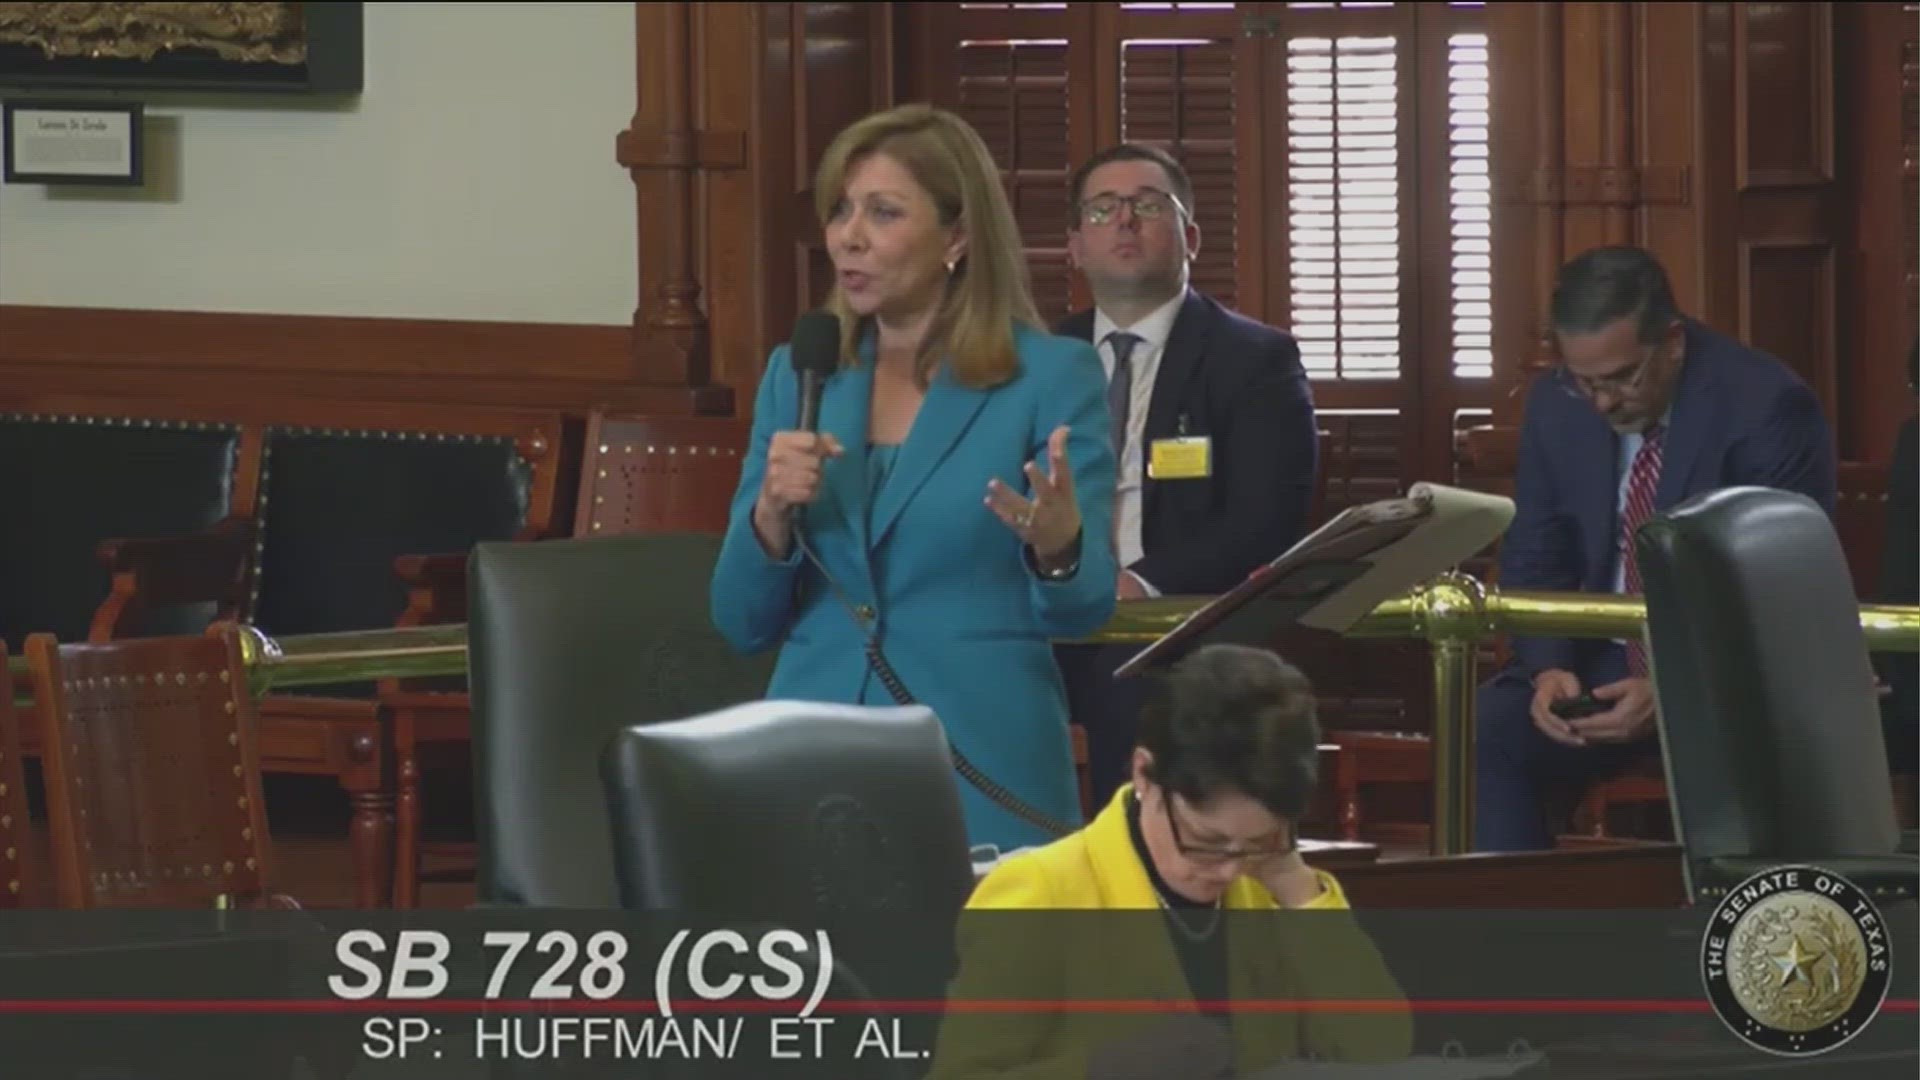 Senate Bill 728 would make Texas law align with federal standards in reporting mental health records of juveniles for gun background checks.